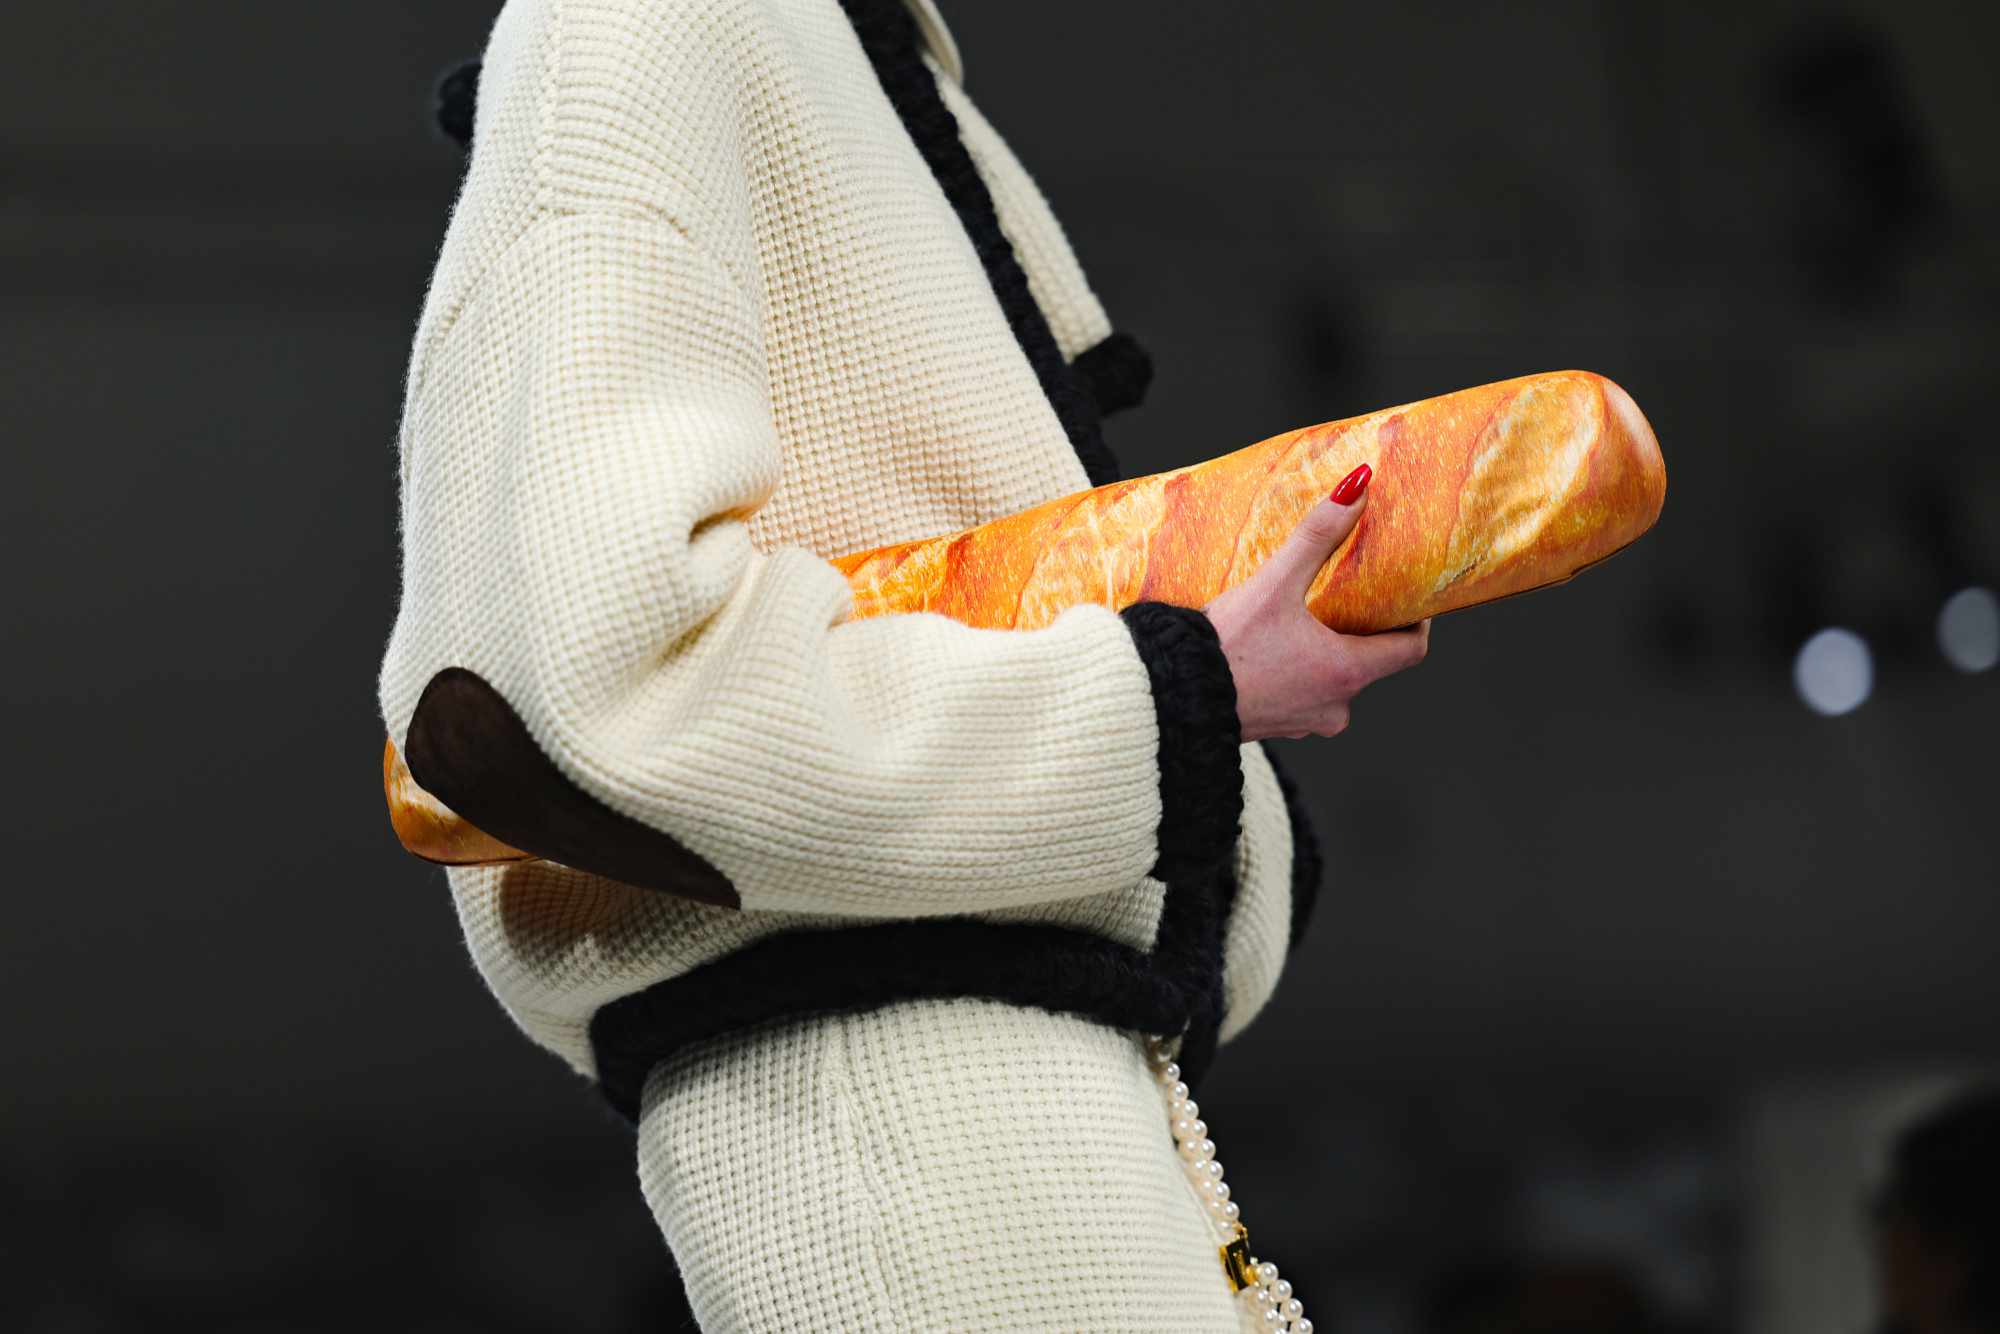 A model at Moschino's runway show holds a baguette-shaped handbag